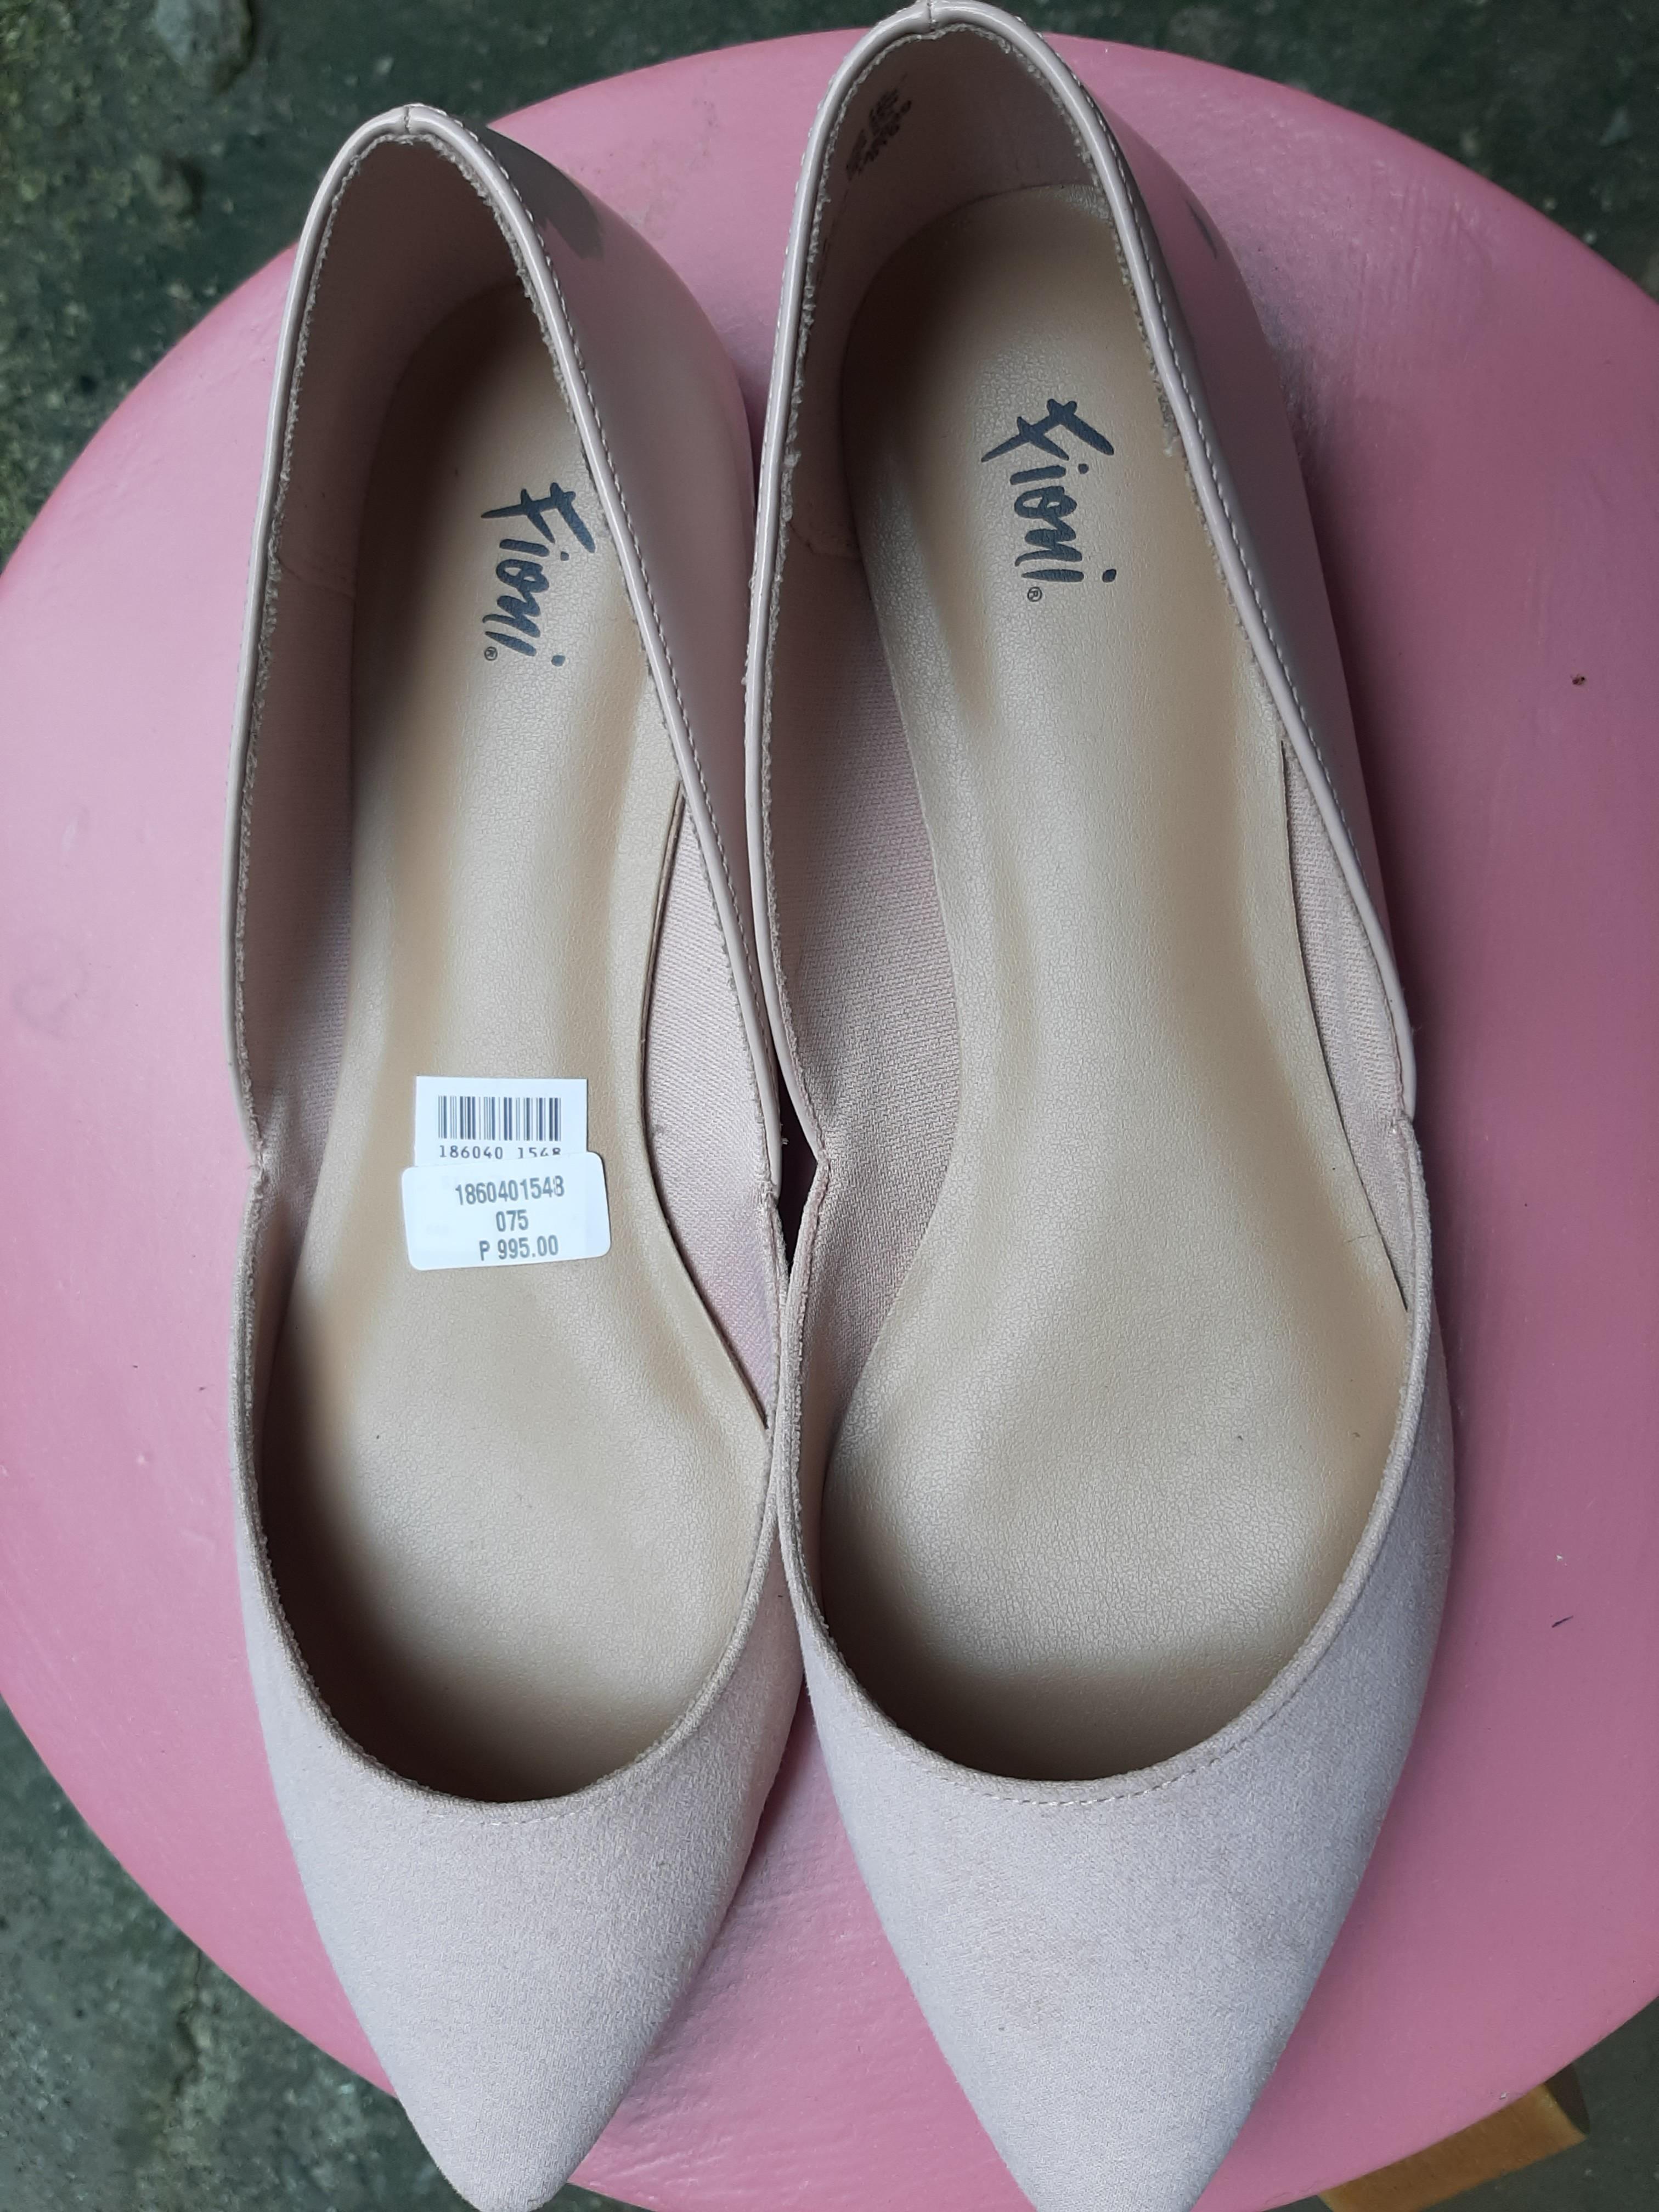 fioni shoes payless